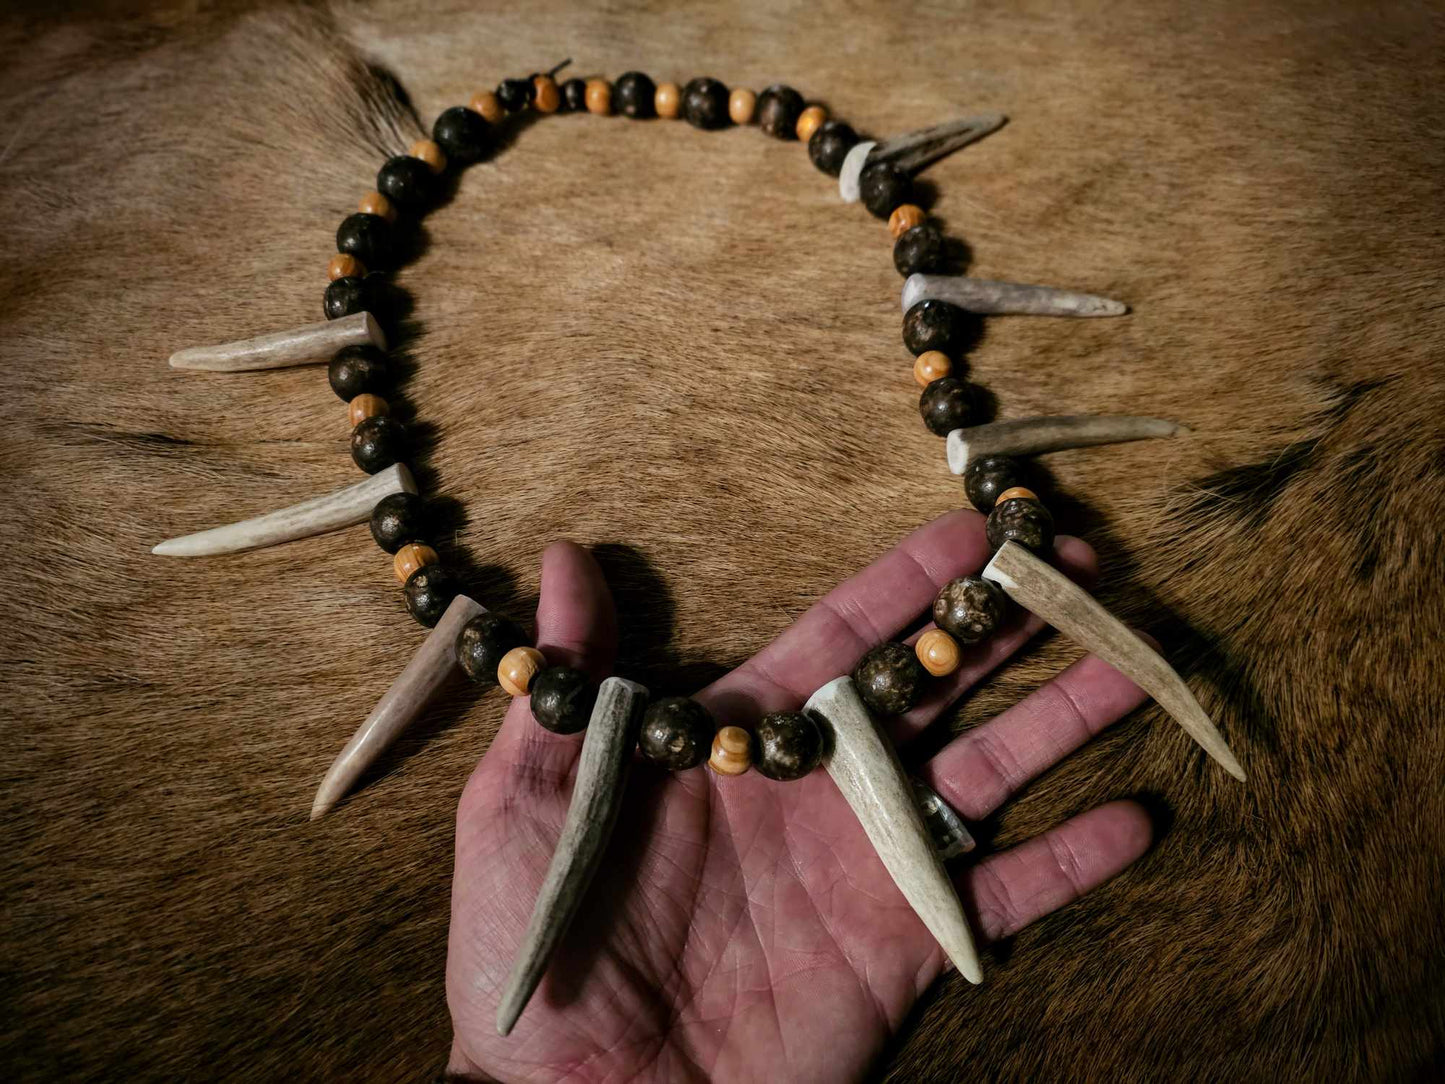 Spirit of the Elk Antler and Wood Bead Necklace